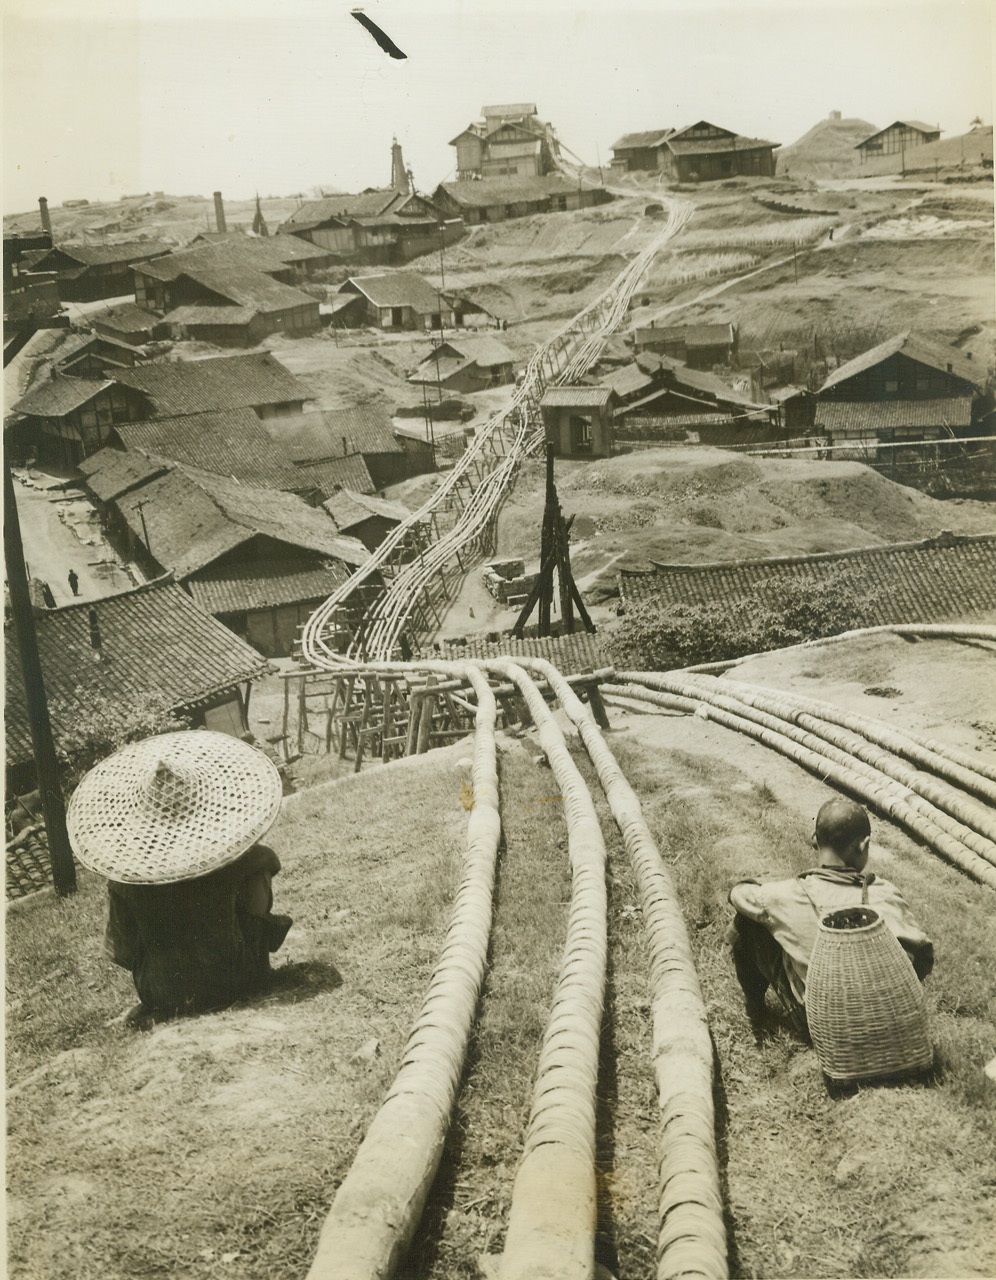 SALT FOR THE CELLARS OF CHINA, 5/23/1944. TSE LIU CHING, CHINA – One of the most thriving industries in this area of China is the salt mines located at Tse Liu Ching. These mines, 2,600 years old, are cultivated by rustic methods, but nevertheless produce 250,000 metric tons of salt a year, or one fourth of all the salt produced in free China. Three hundred thousand laborers work the mines, from which salt is shipped to all parts of the East. Picture shows bamboo pipelines running toward one of the refineries from the wells. Credit: ACME photo by Frank Cancellare, War Pool Correspondent;